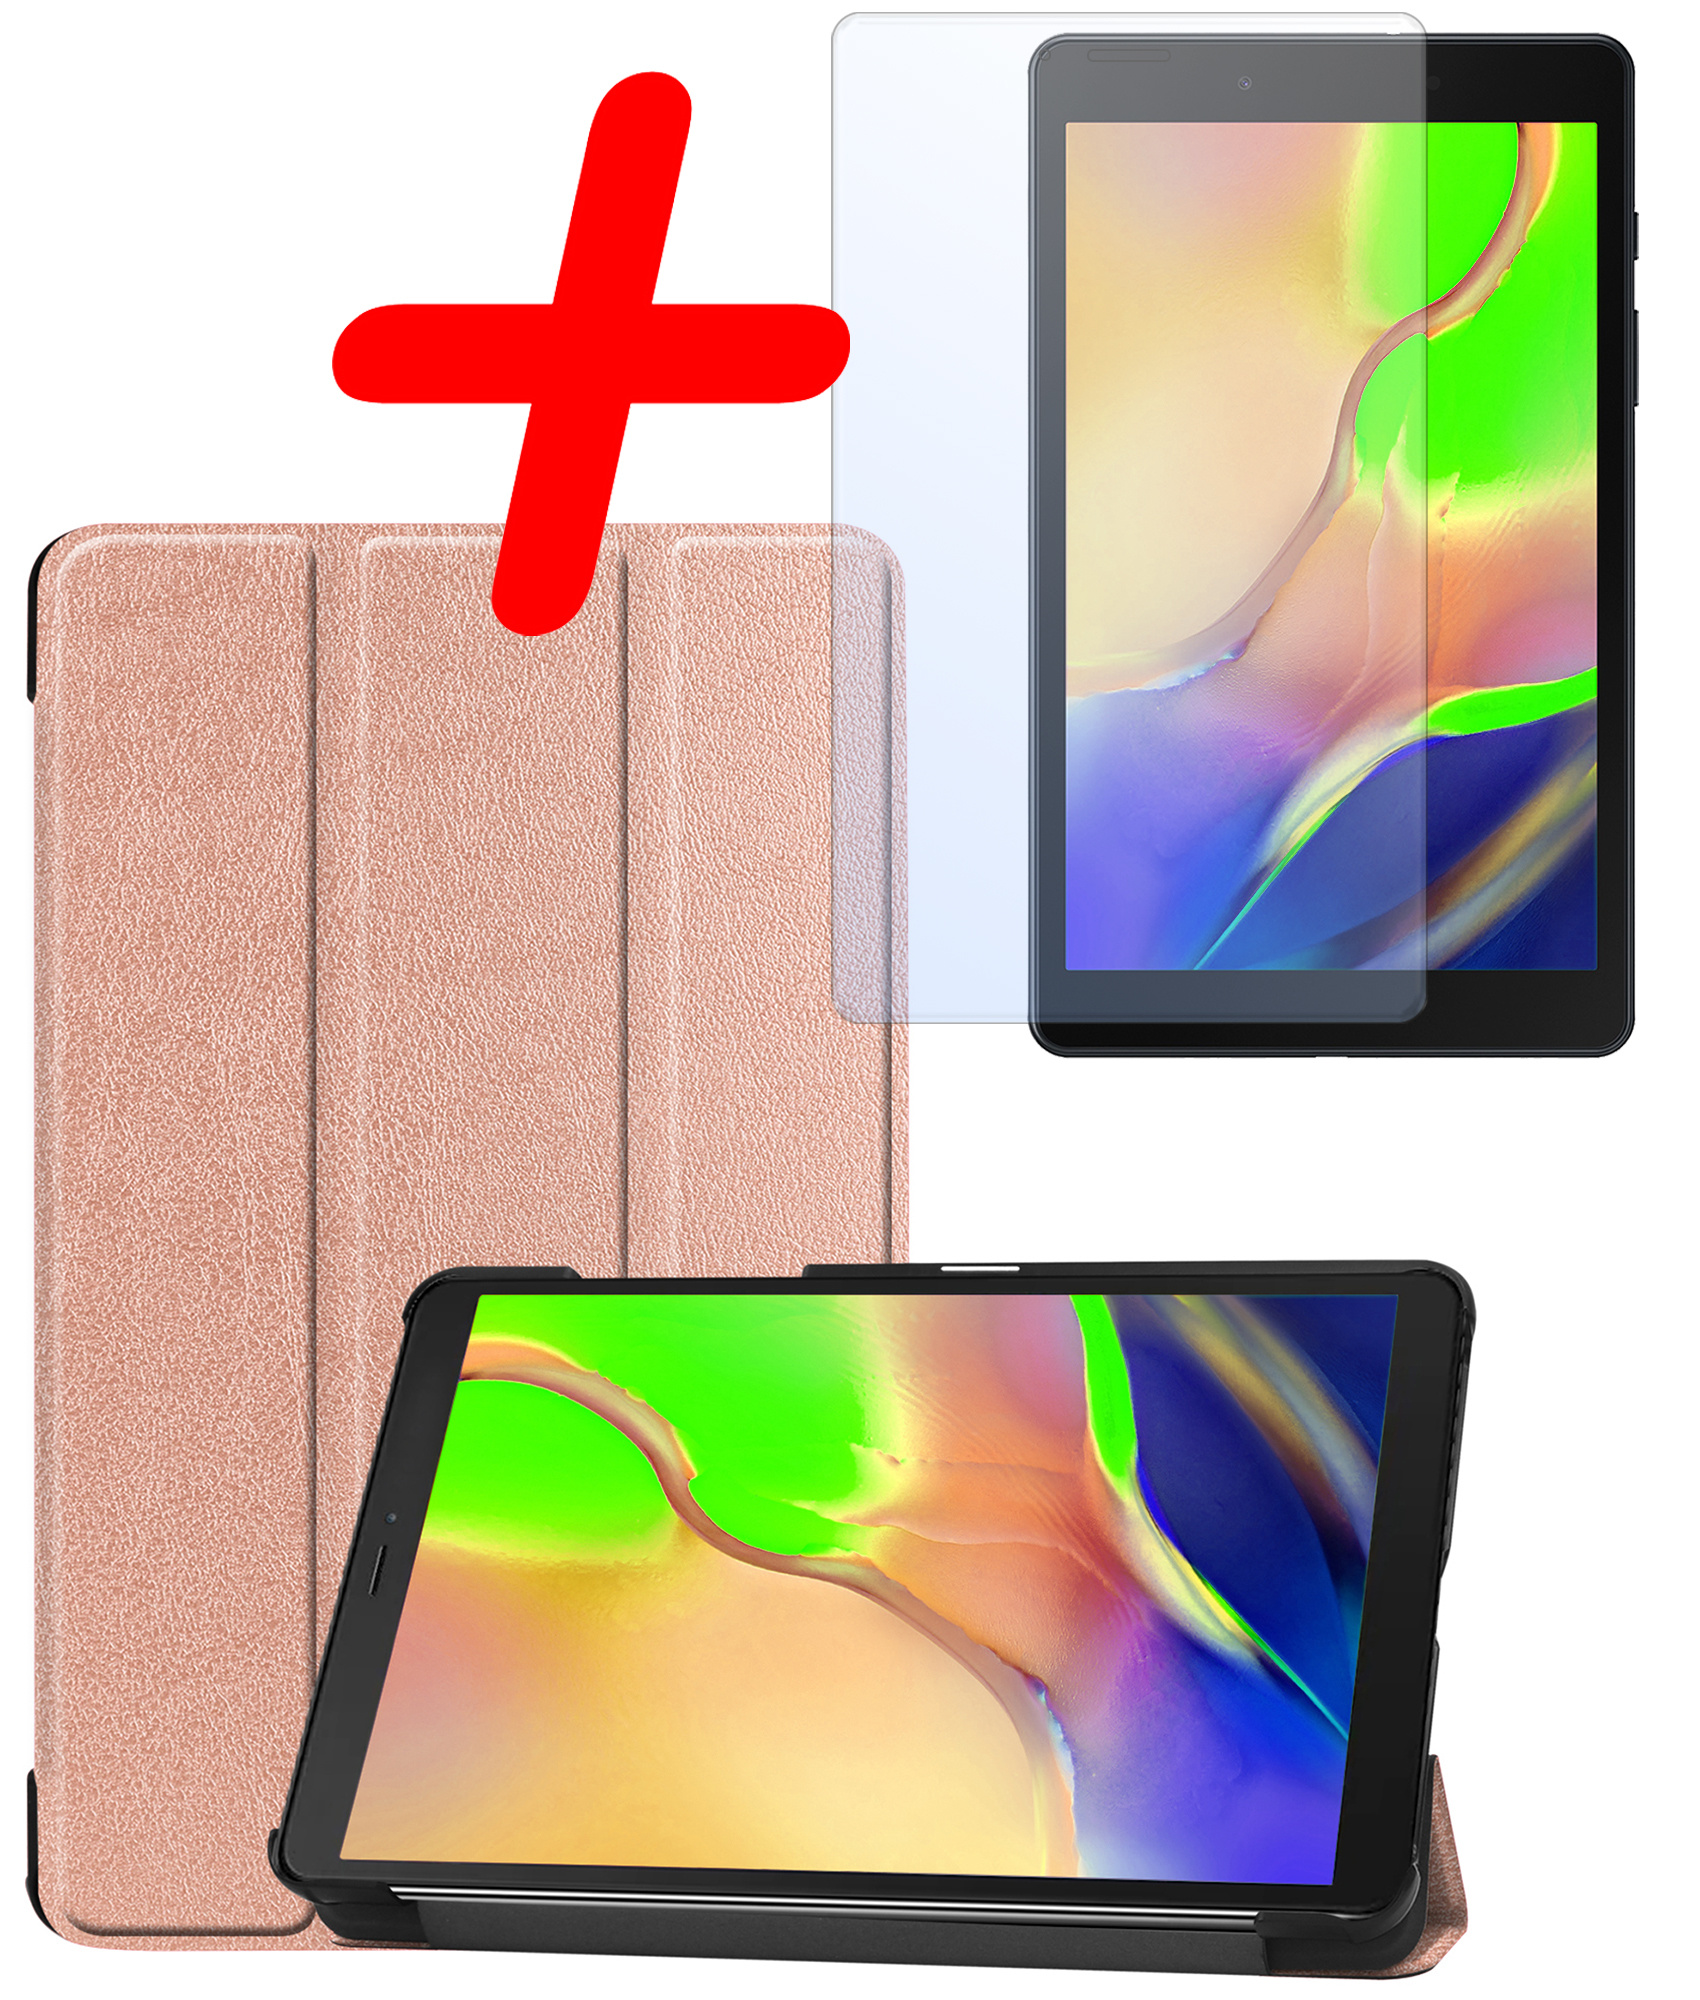 BASEY. Samsung Galaxy Tab A 8.0 2019 Hoes Book Case Luxe Hoesje Met Screenprotector - Samsung Galaxy Tab A 8.0 (2019) Hoesje Book Case Hoes - Rosé Goud